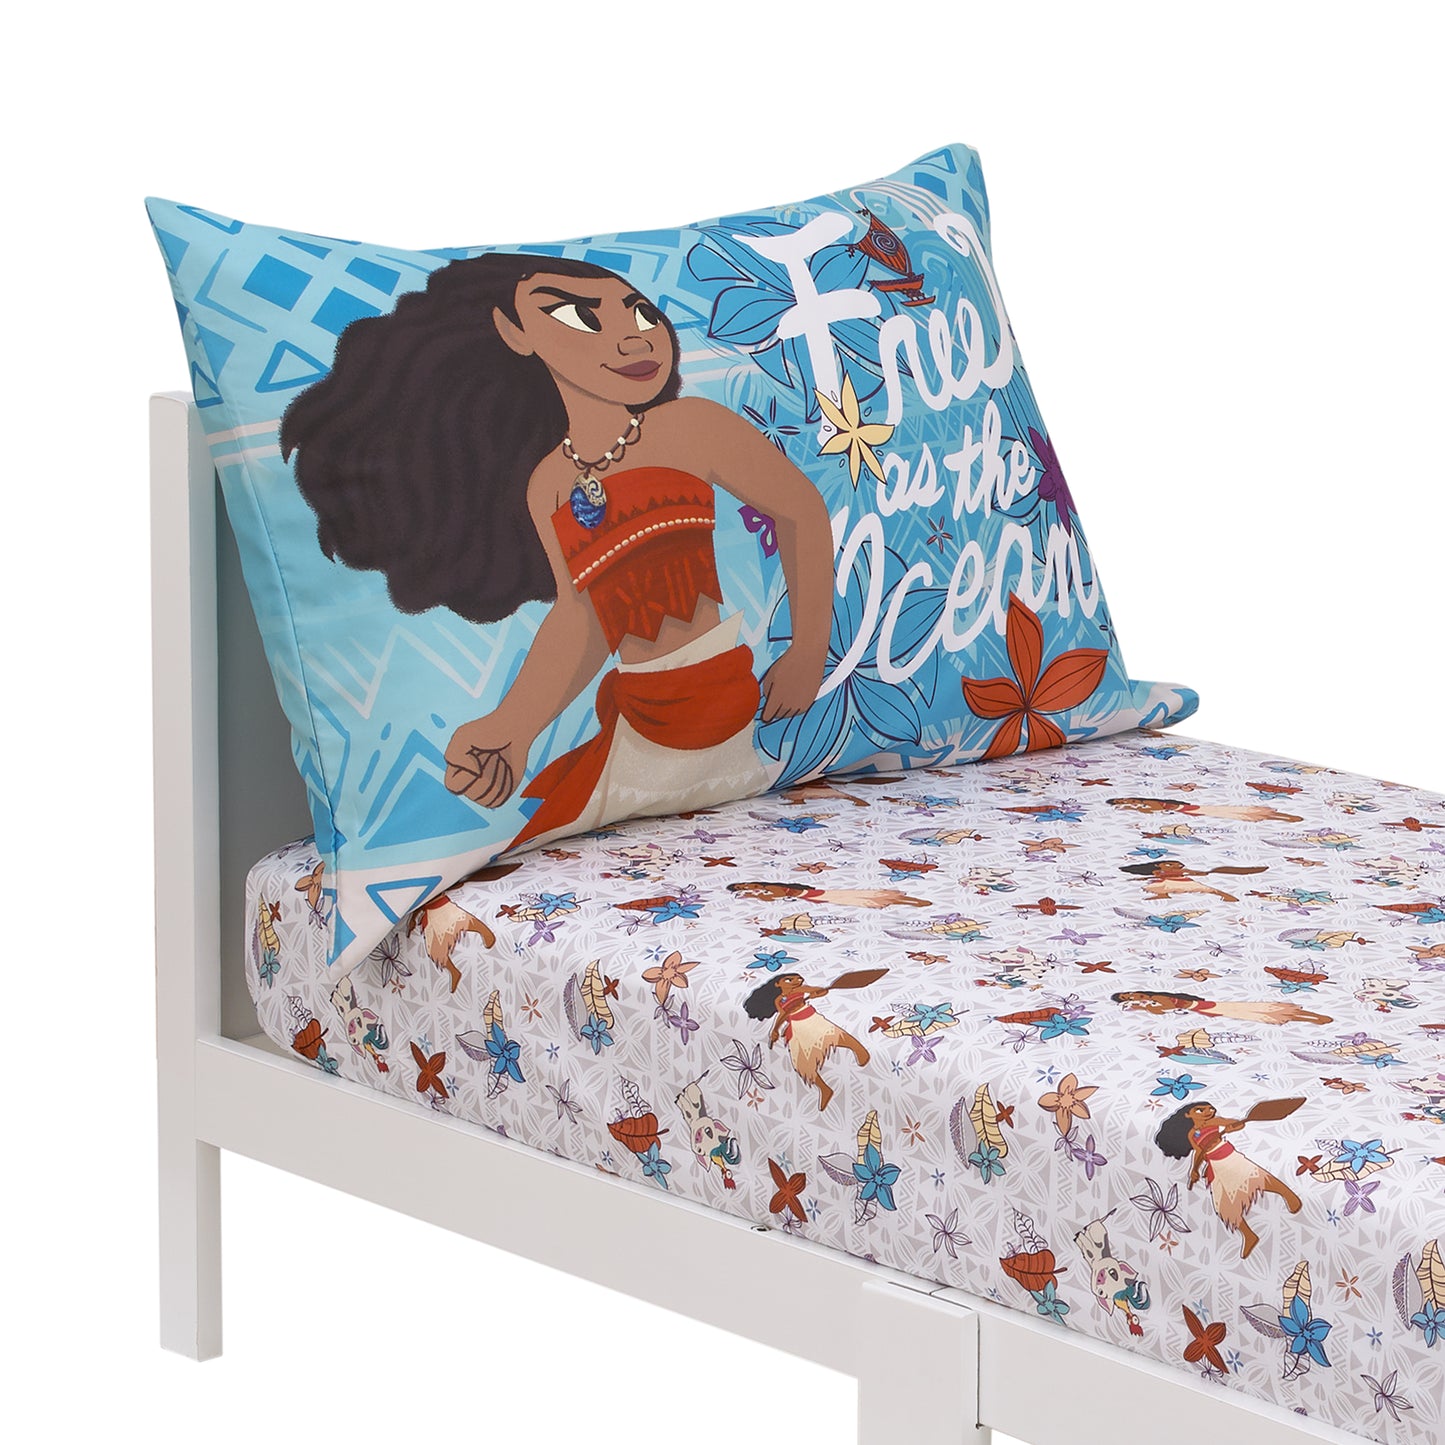 Disney Moana Free as the Ocean Aqua, Purple, Orange, and White Tropical 2 Piece Toddler Sheet Set - Fitted Bottom Sheet and Reversible Pillowcase